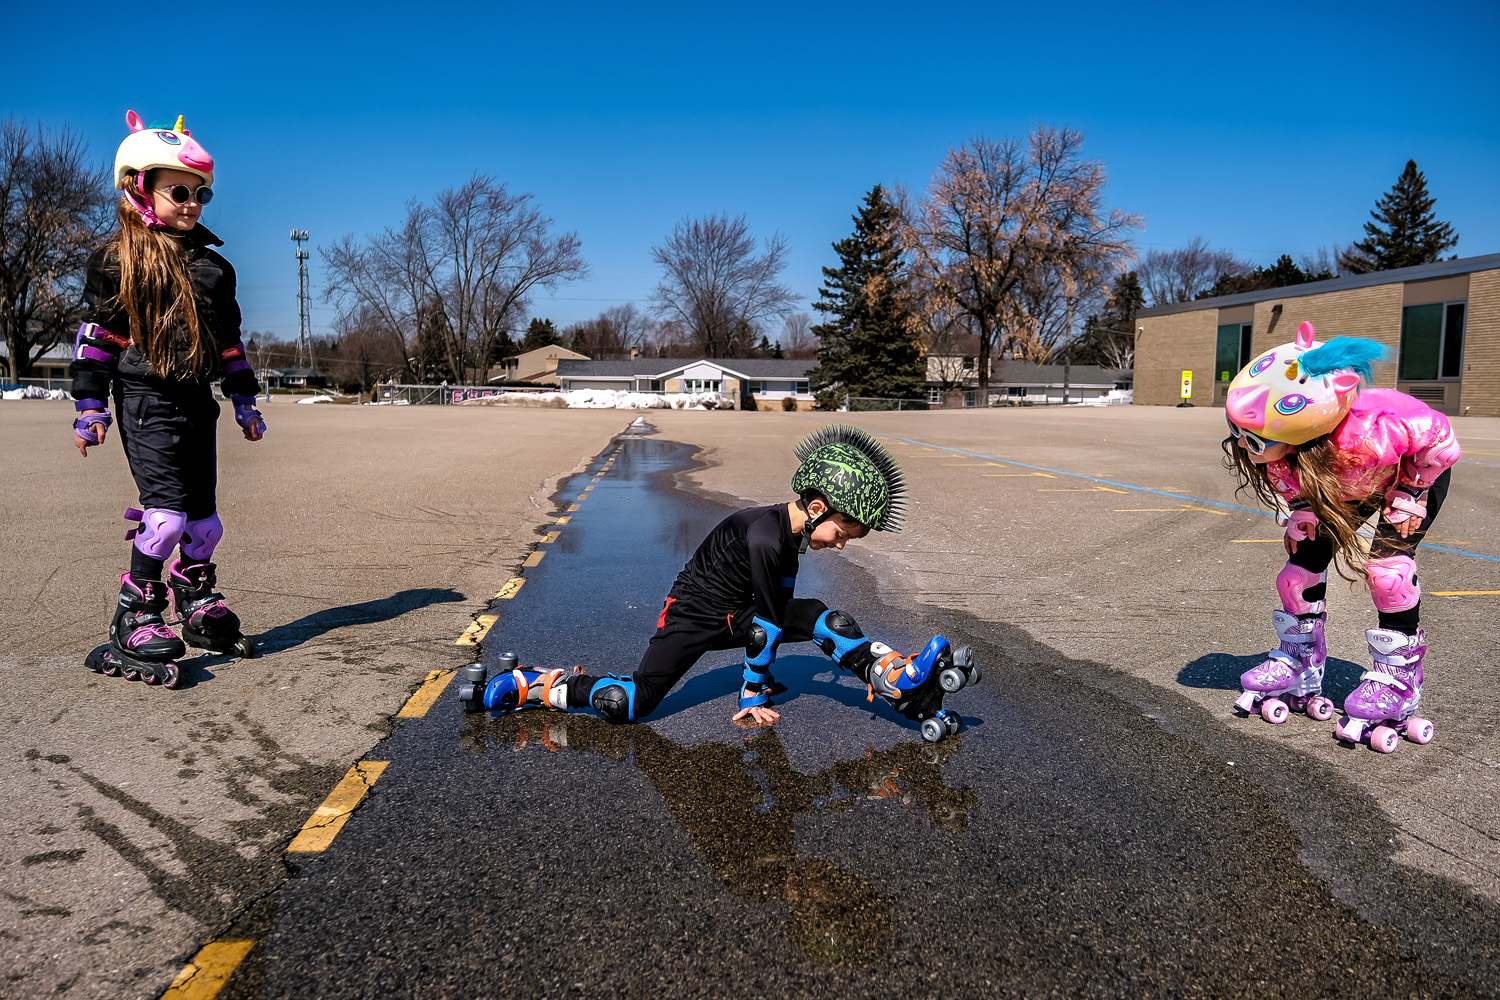 Boy in roller-skates does splits across a puddle